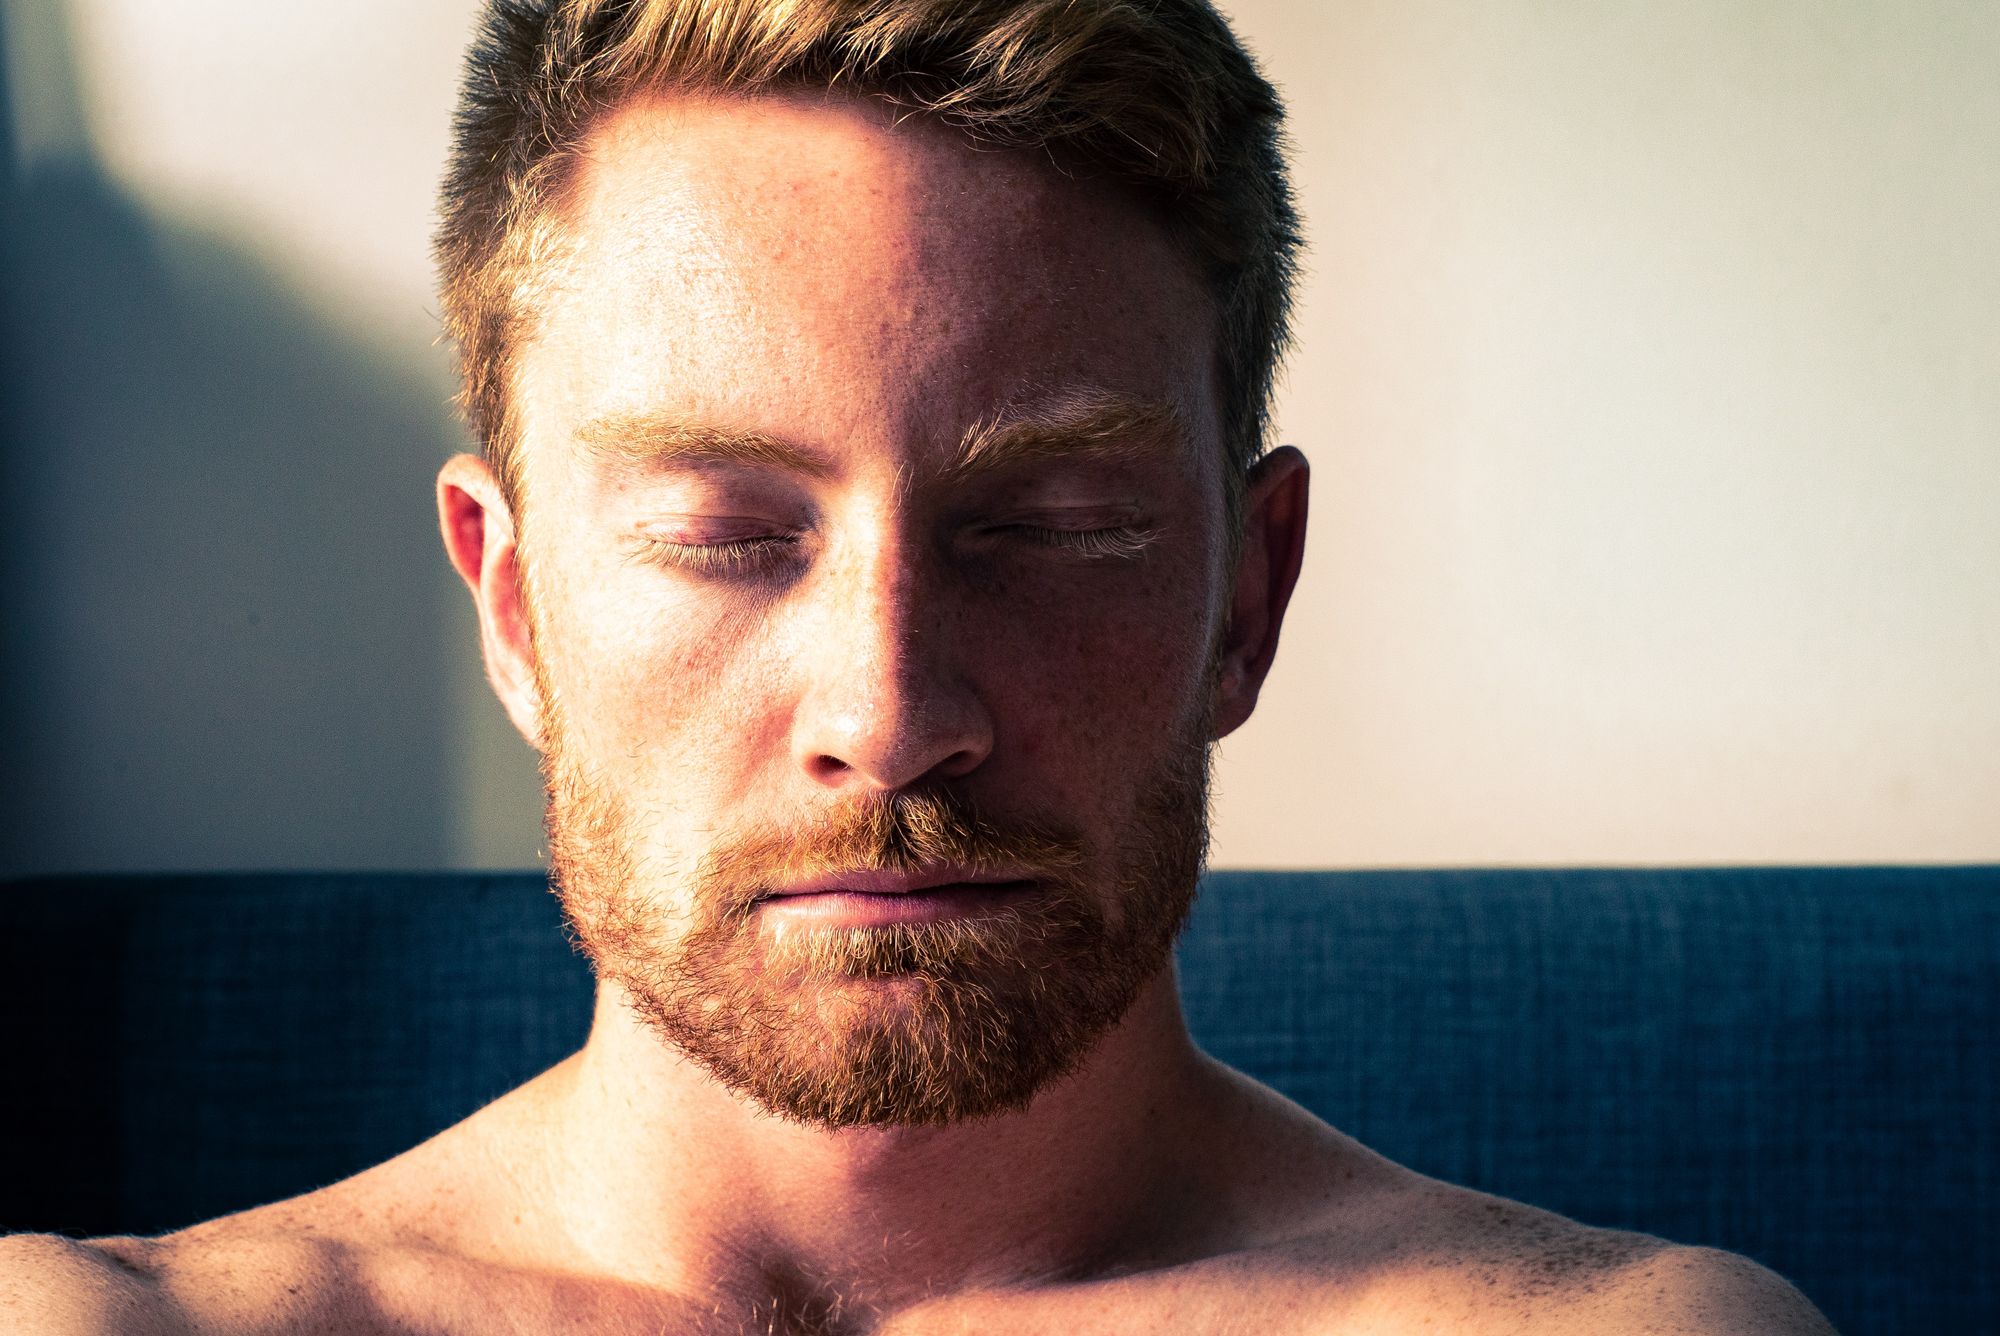 man breathing during meditation integration session for anxiety